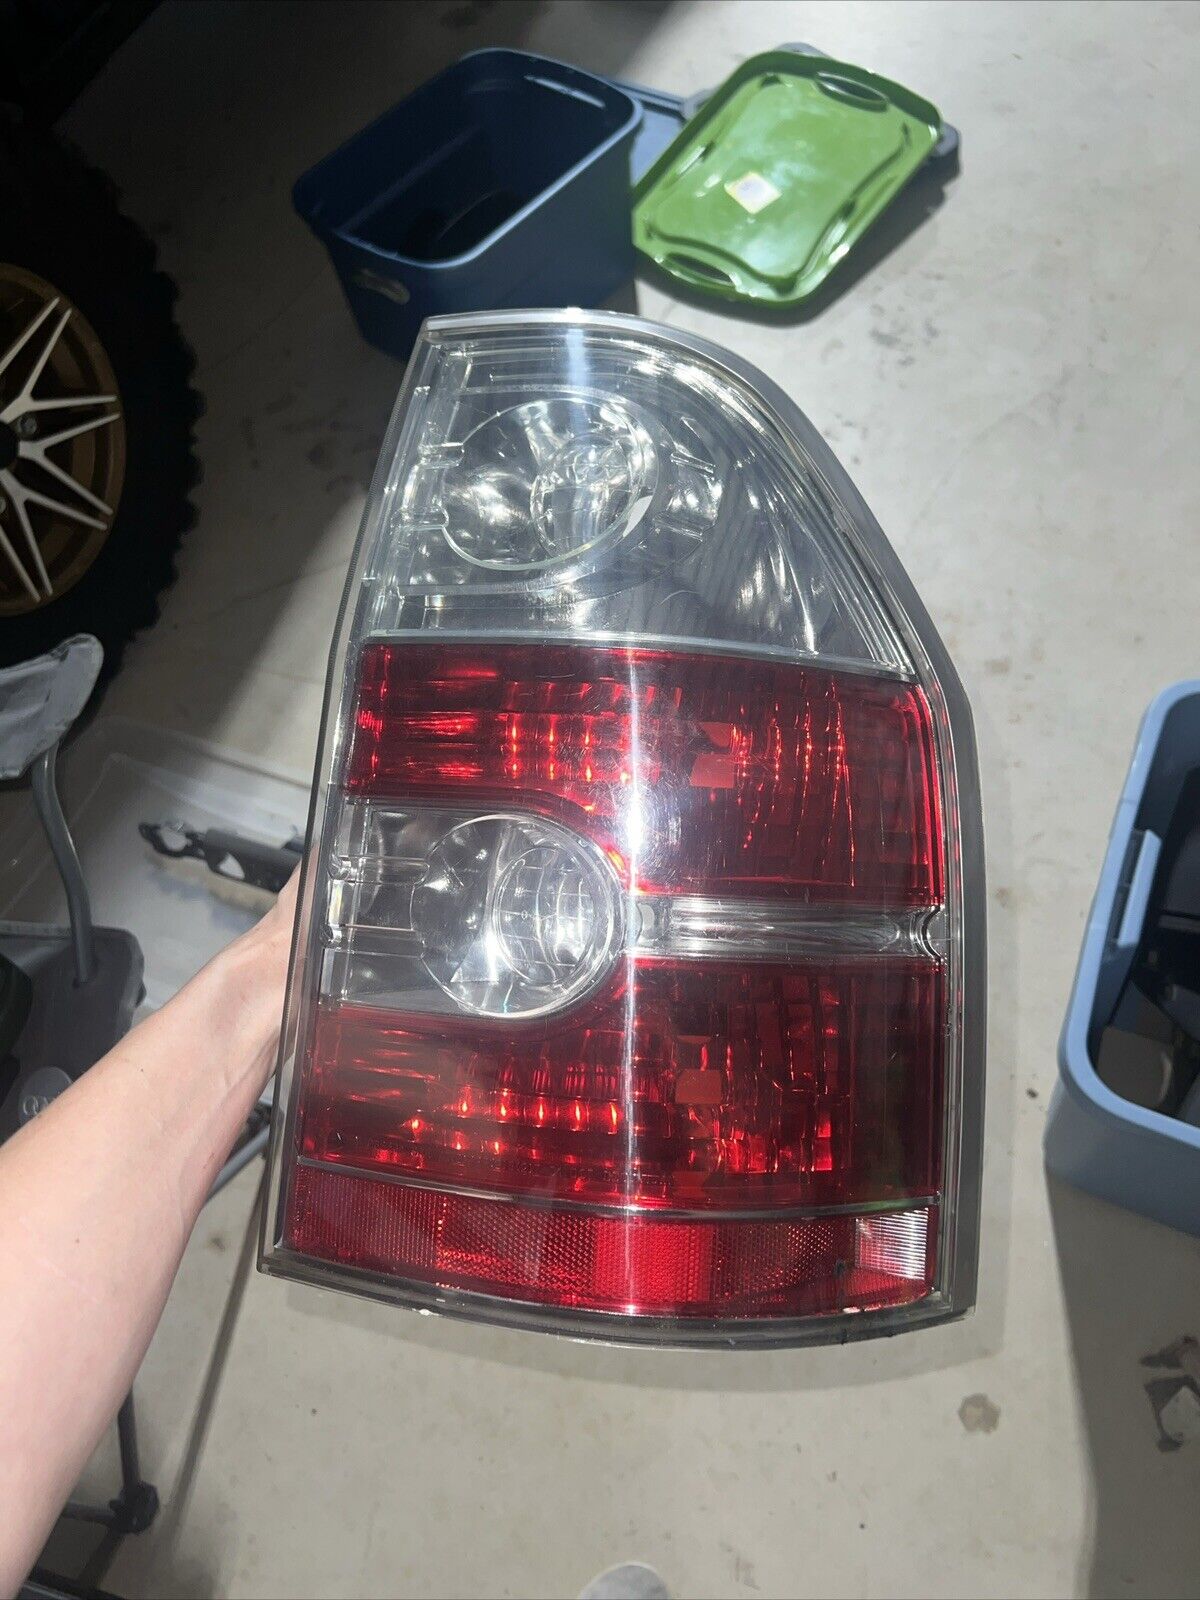 04 05 06 Acura Mdx Touring 3.5L Rear Passenger Tail Light Taillamp 33501-S3v-A11